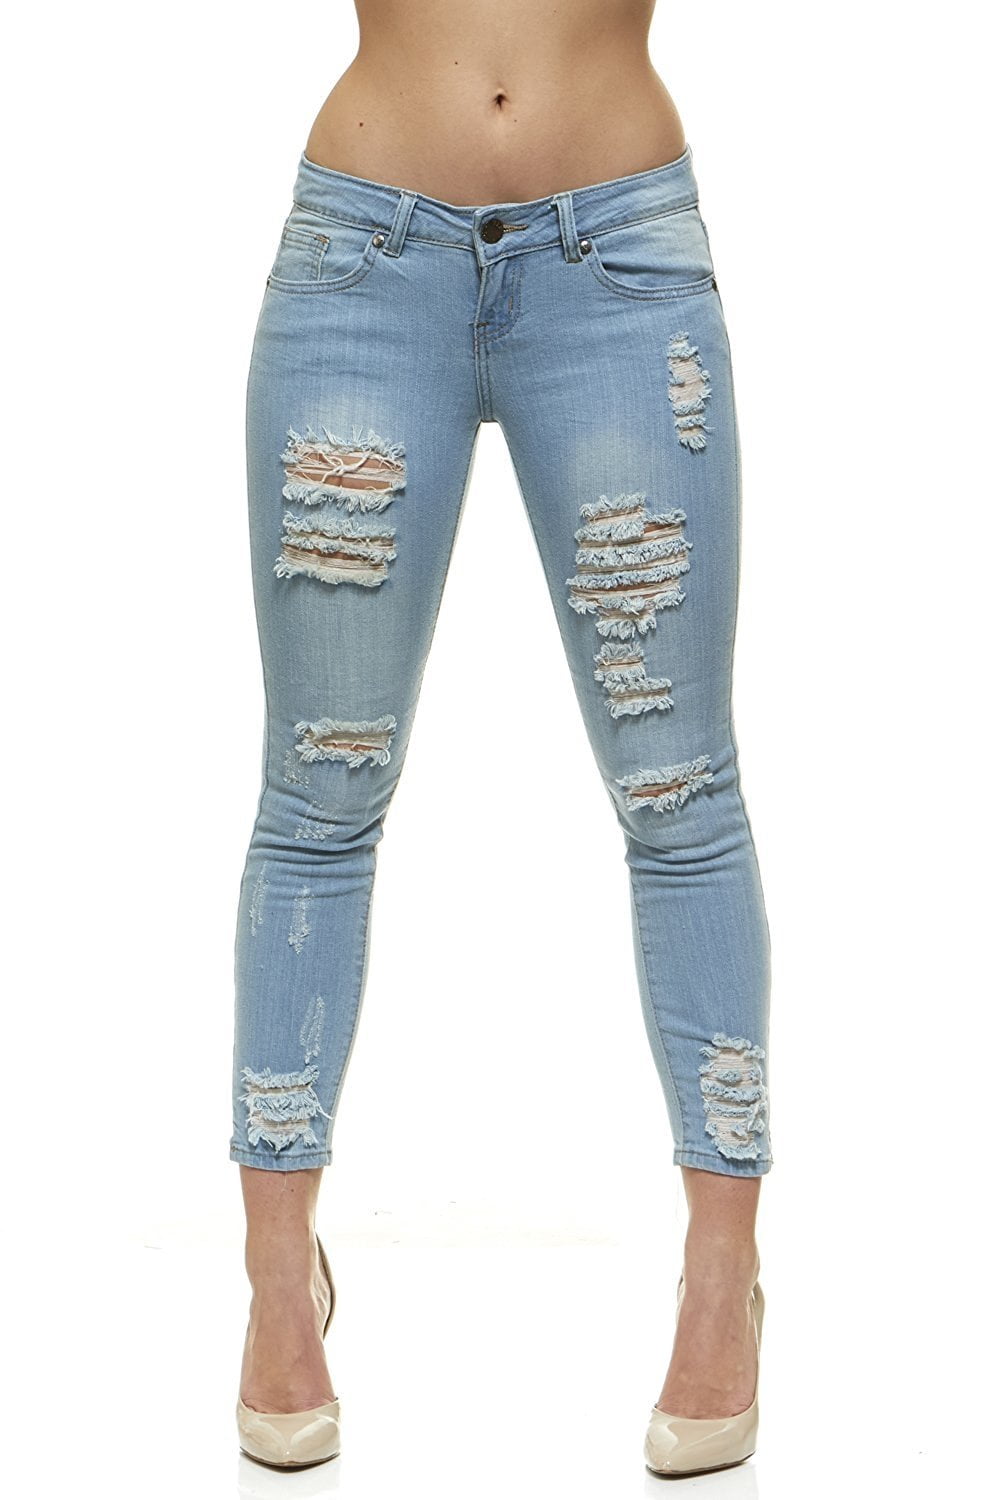 cheap cute ripped skinny jeans